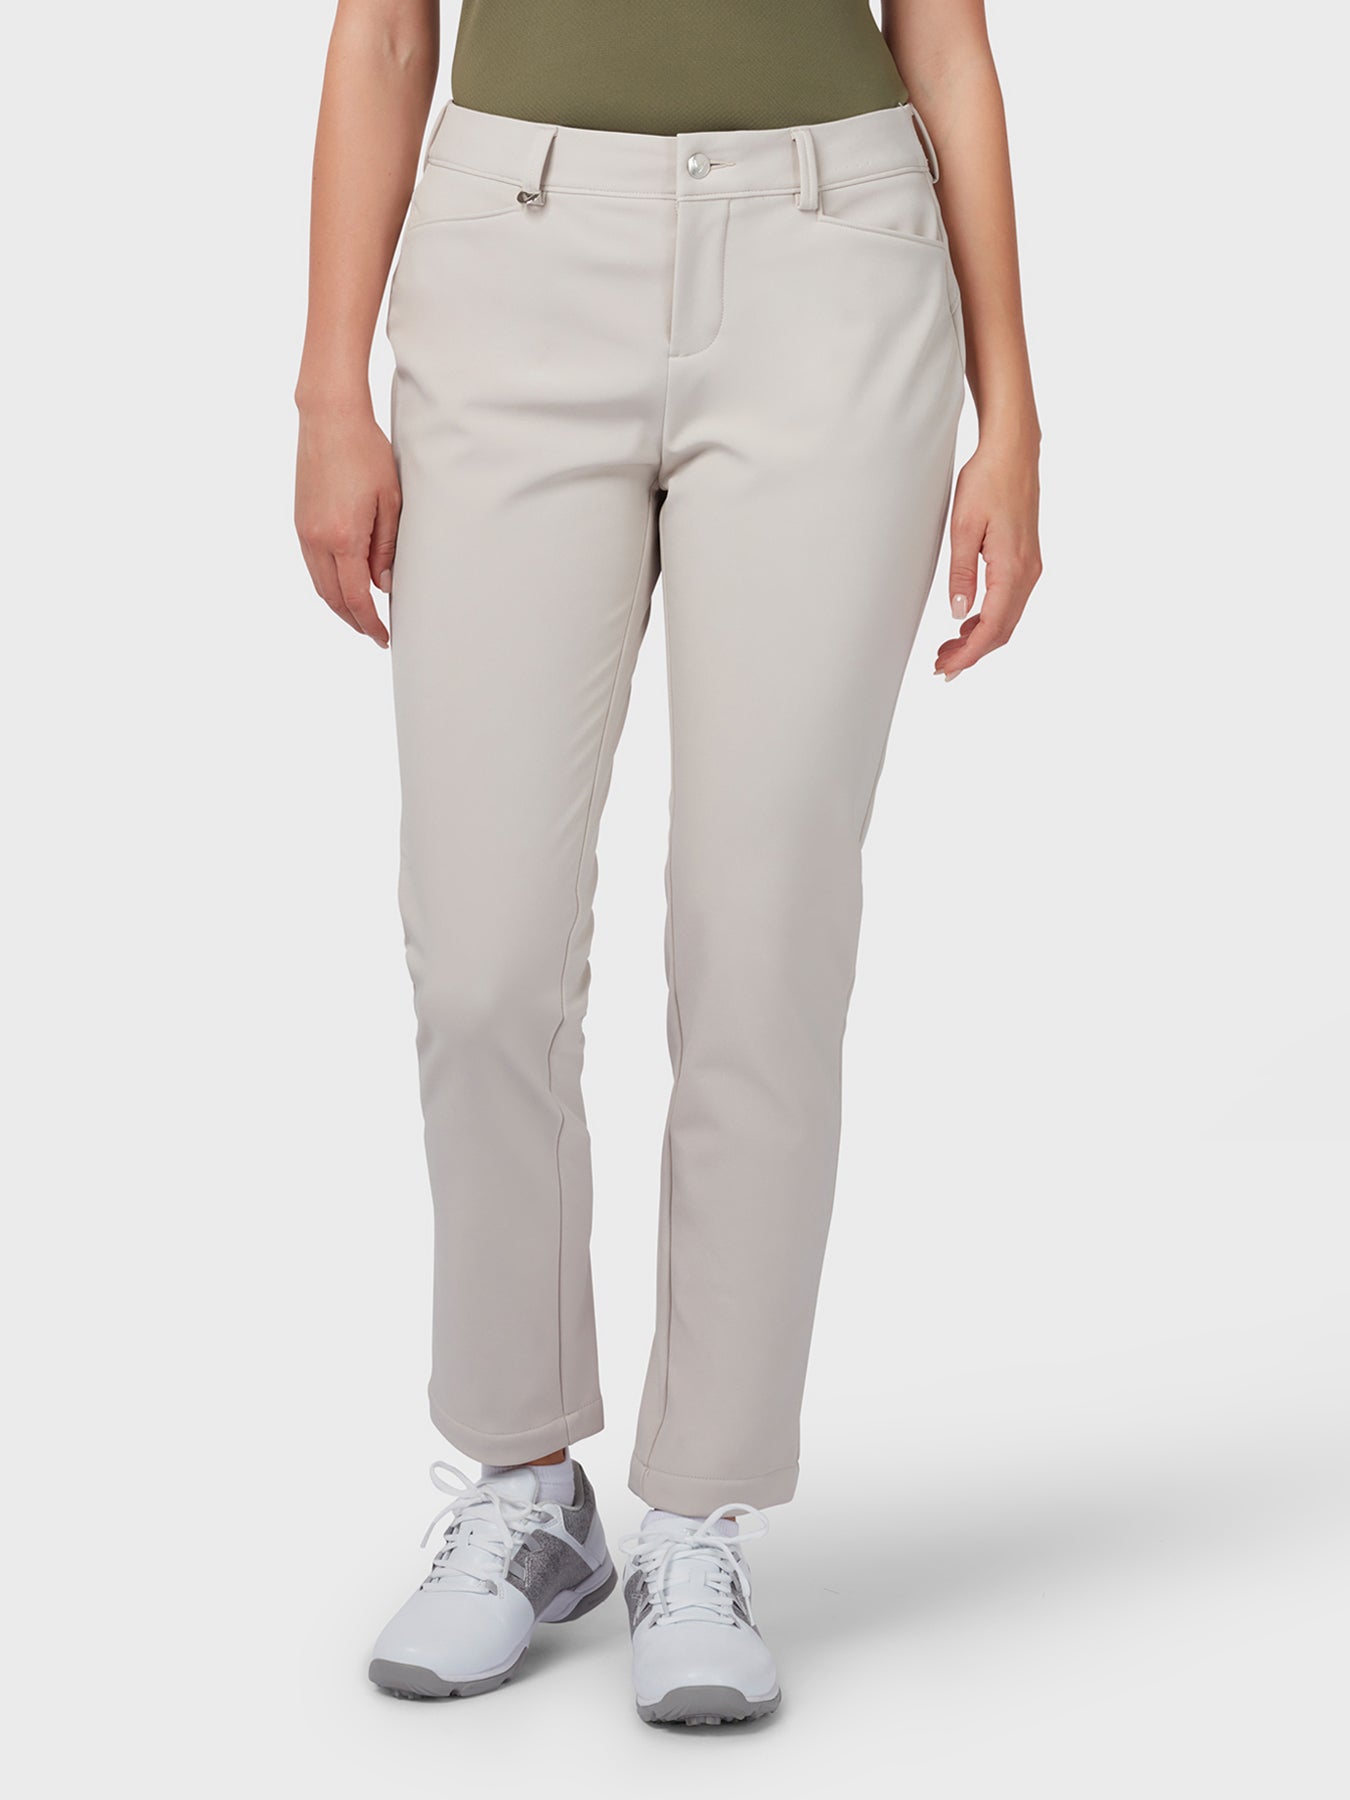 View Womens Thermal Trouser In Chateau Grey Chateau Grey XS 29 information